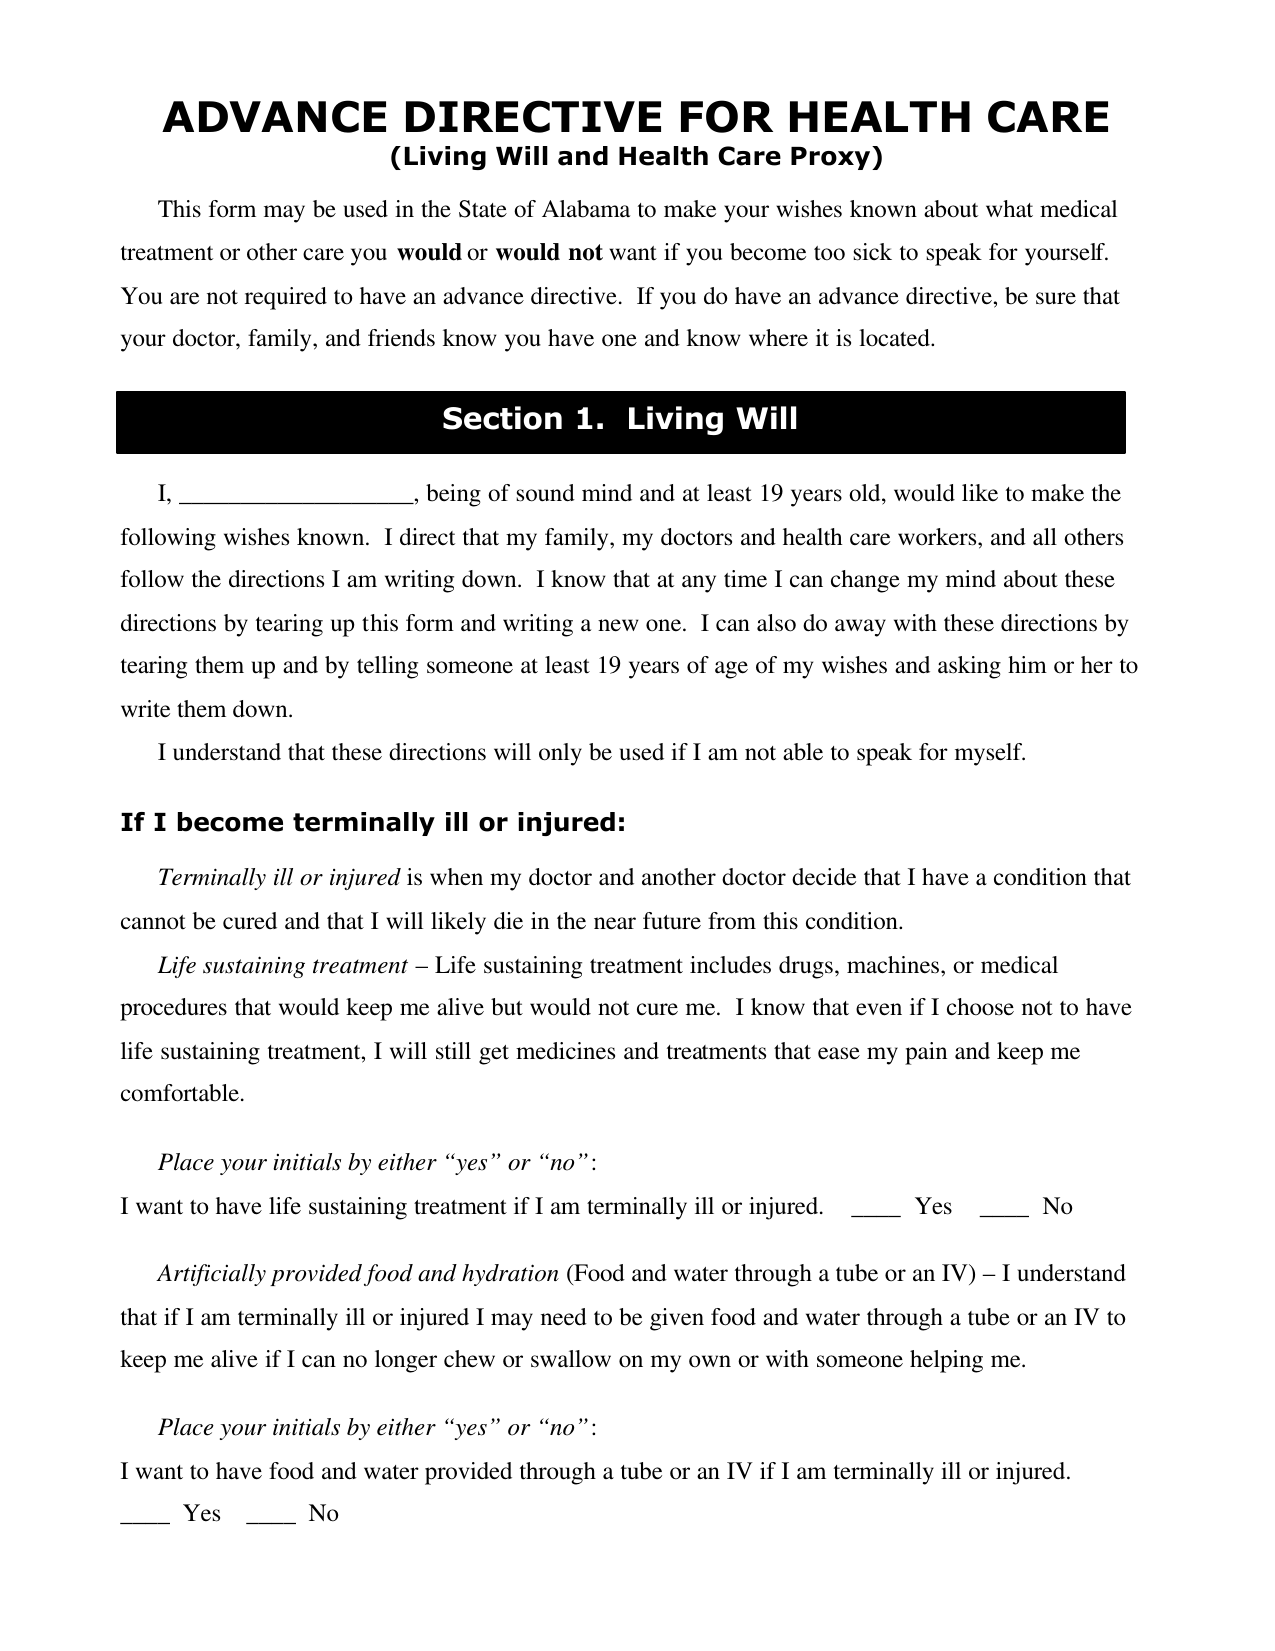 Download Alabama Living Will Form Advance Directive 